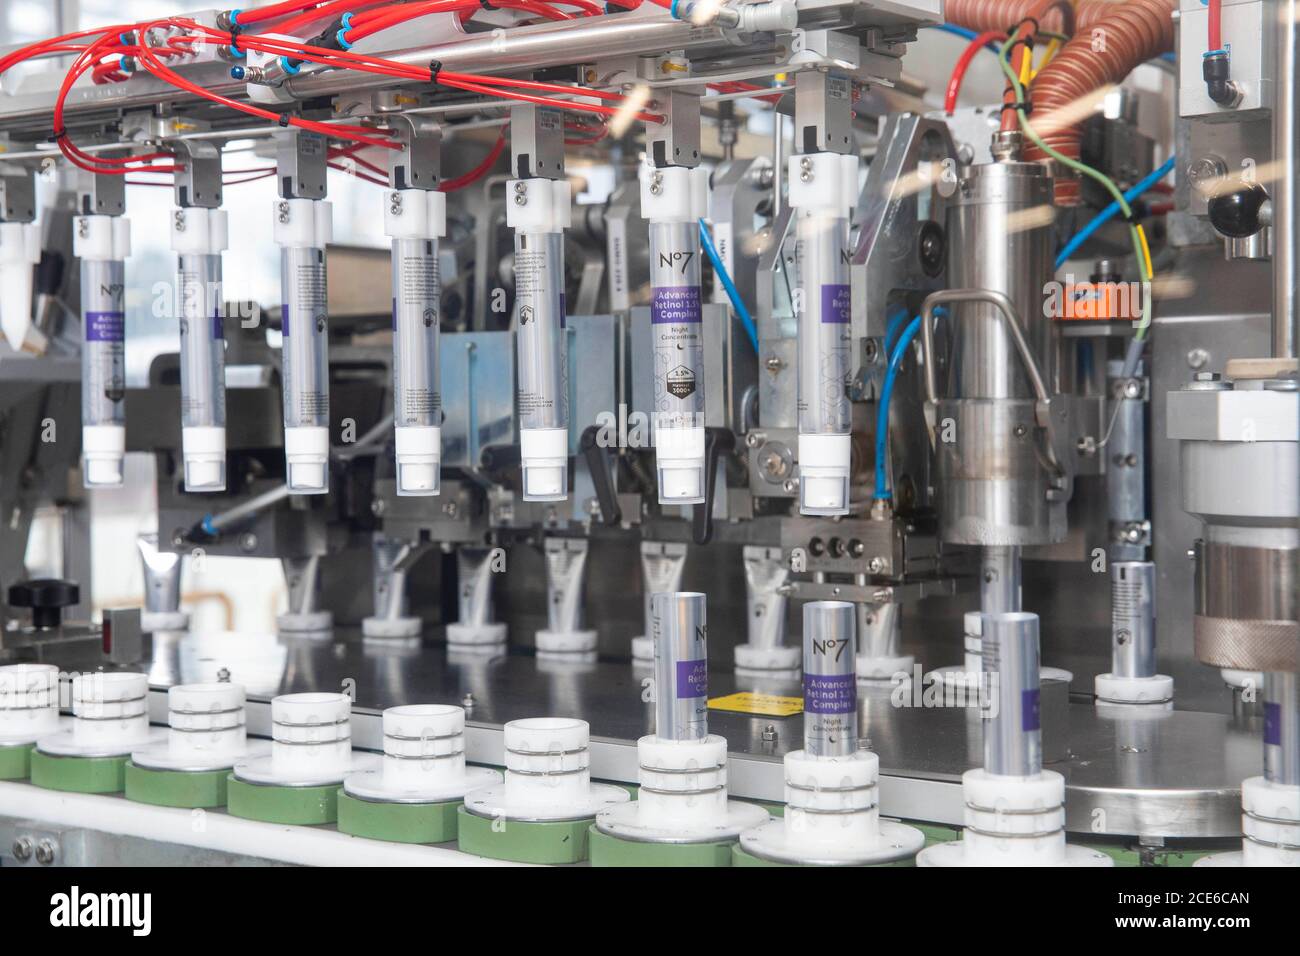 A behind-the-scenes look at the Boots laboratory and factory in Nottingham as scientists work on the No1 selling beauty product since its launch in May, the No7 ADVANCED Retinol 1.5 percent Complex Night Concentrate as it prepares of its in-store launch. Stock Photo